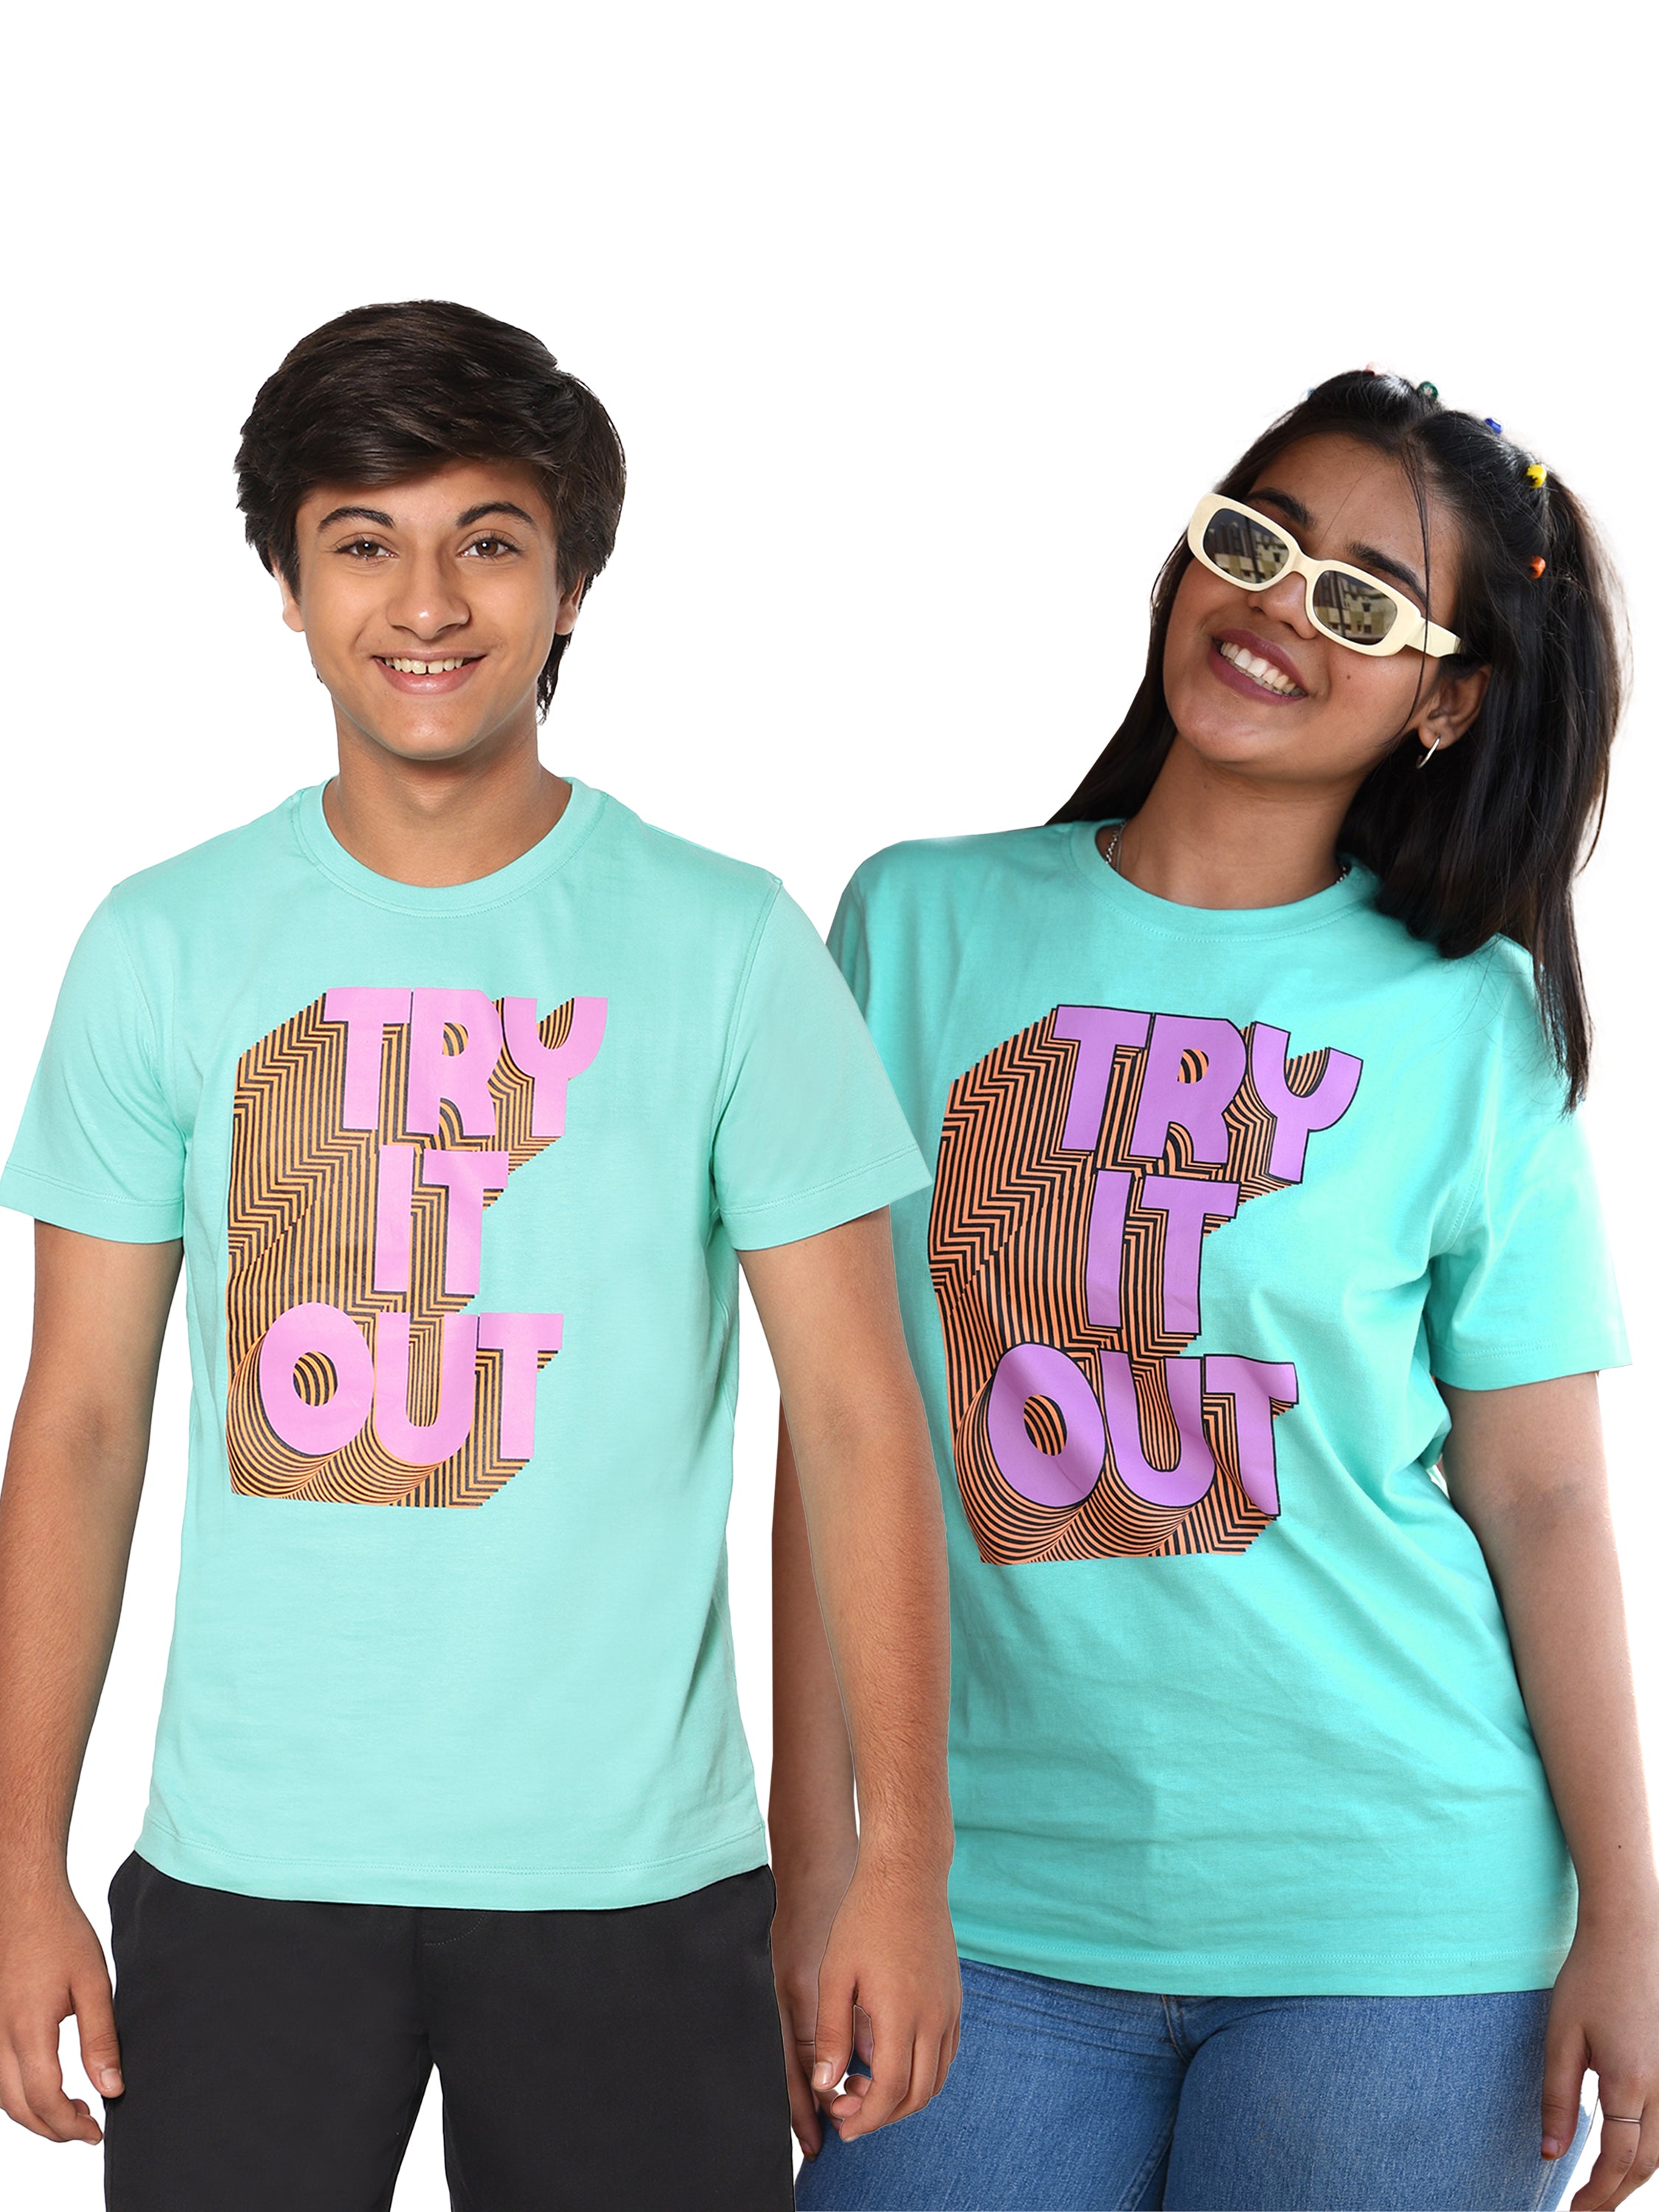 TeenTrums Unisex statement T-shirt - Try it out - Turquoise